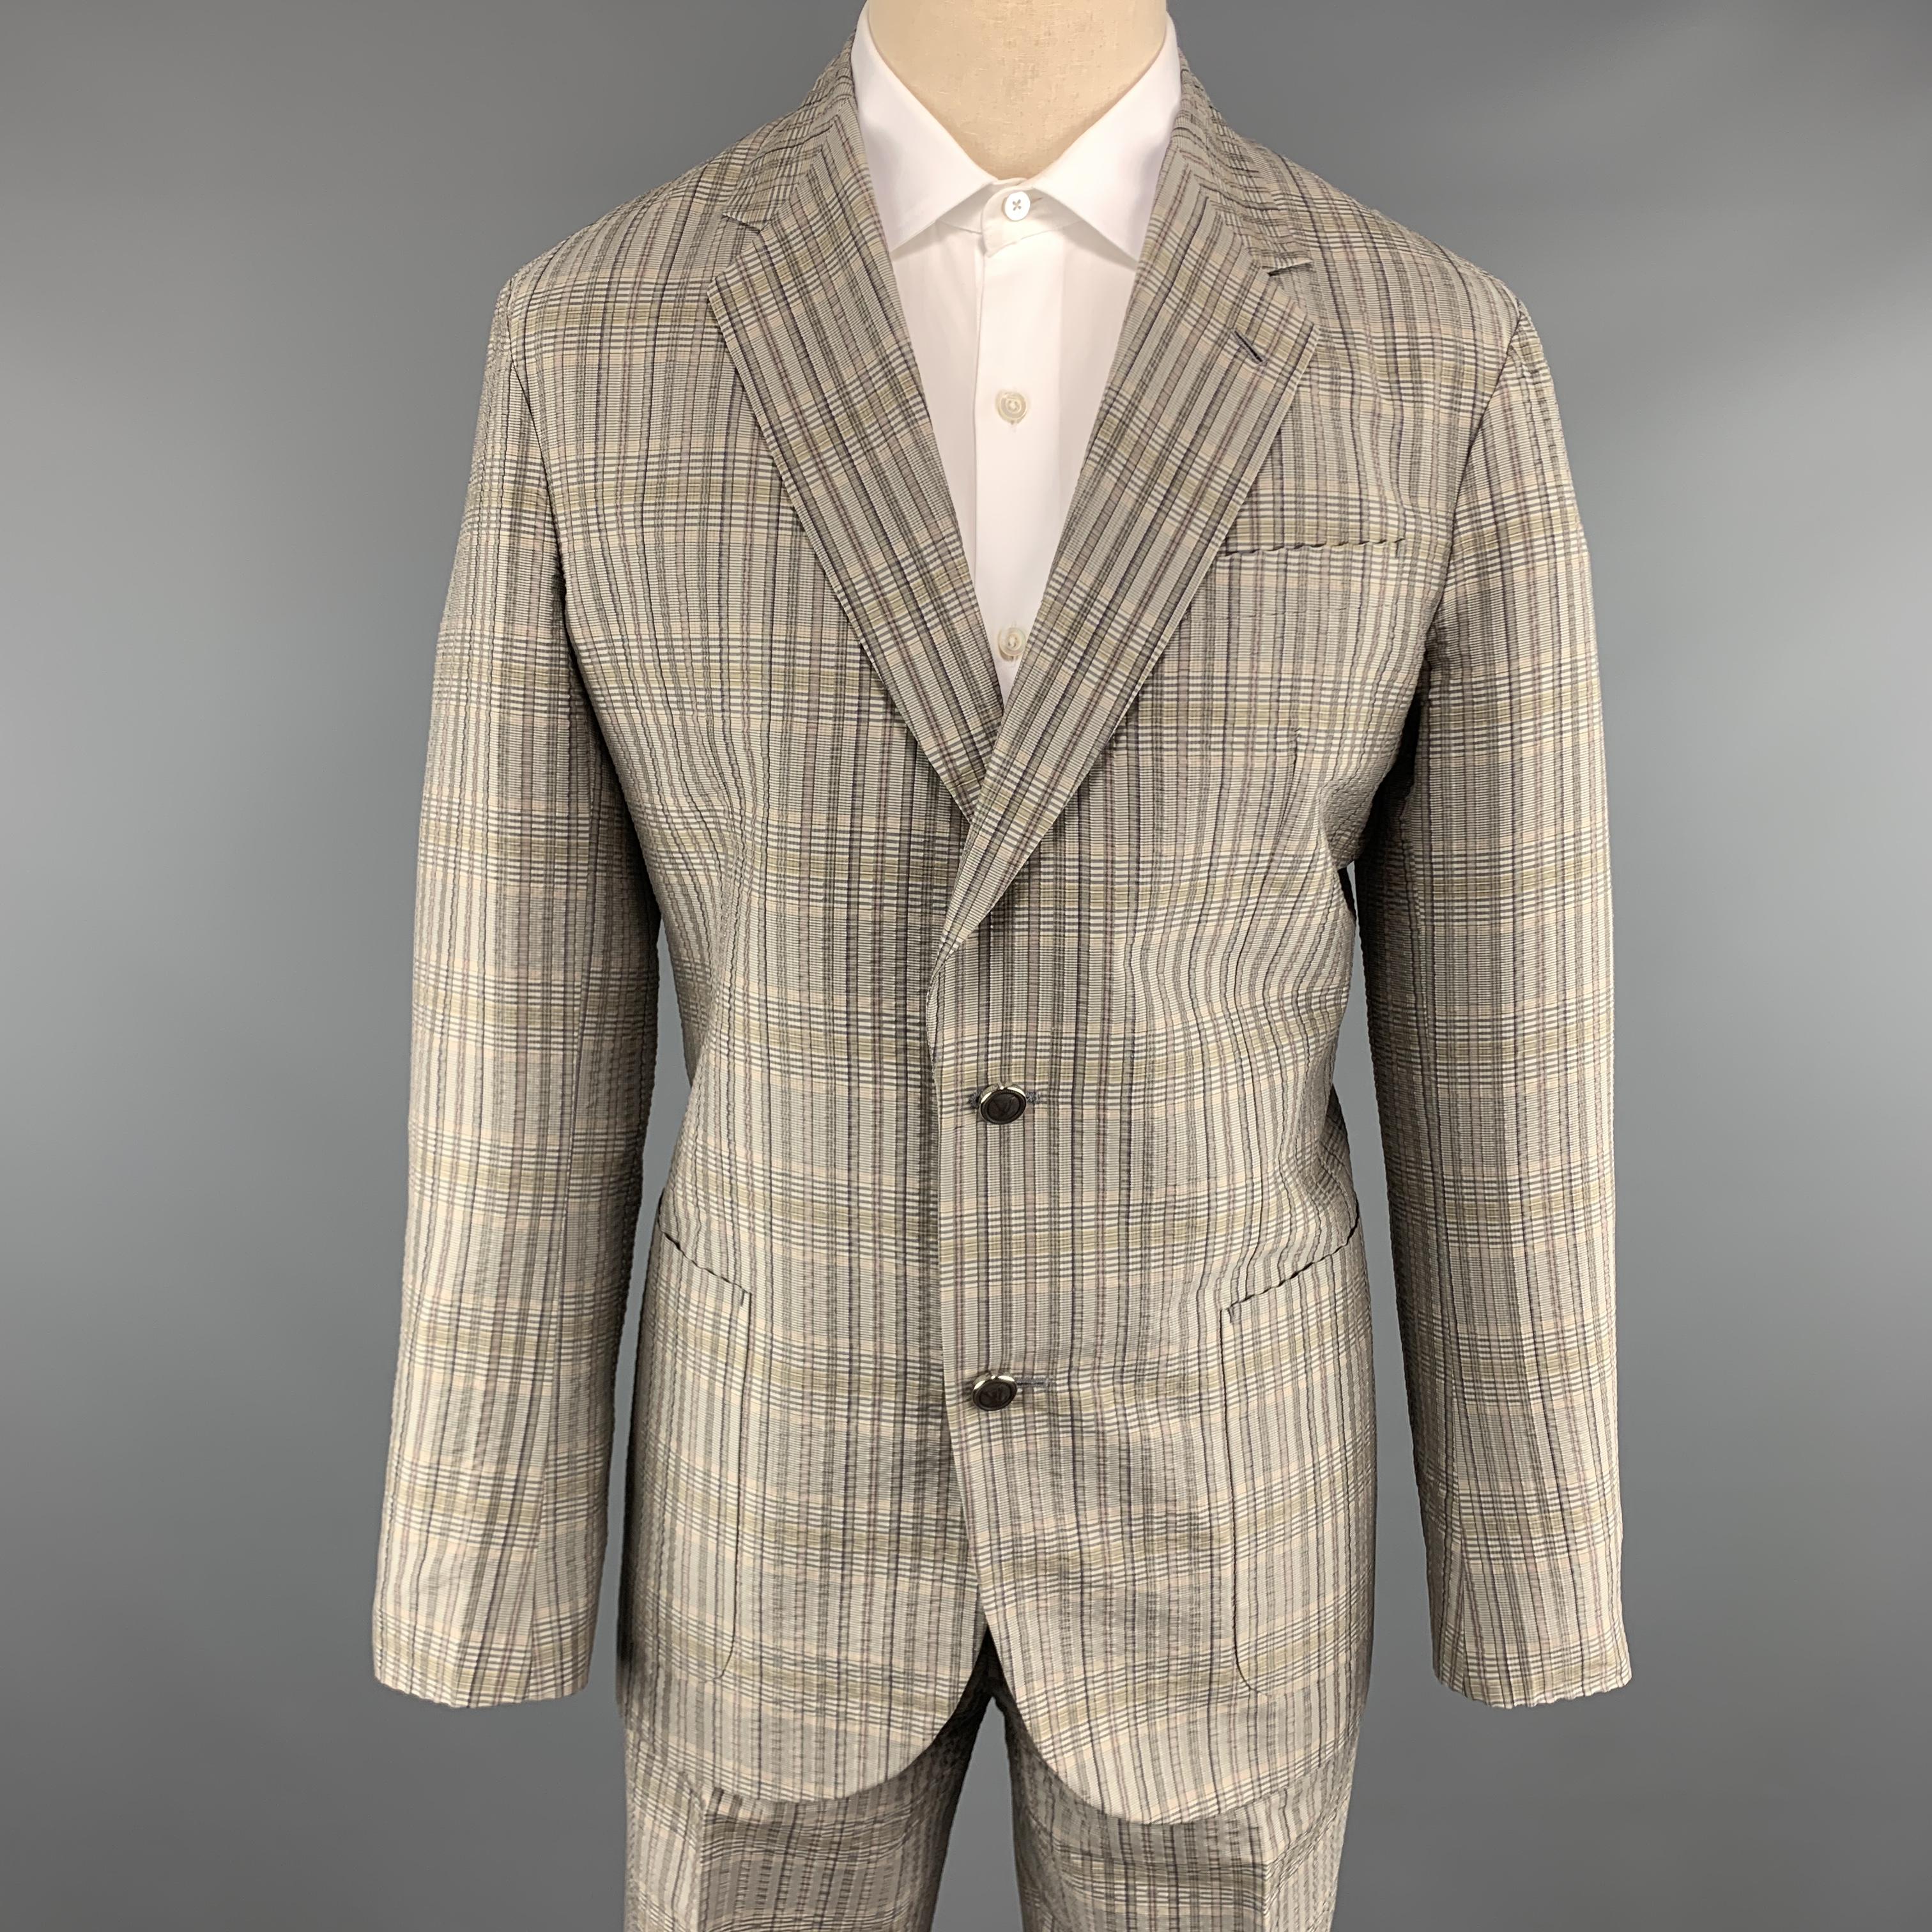 LOUIS VUITTON suit comes in silver gray textured silk with a muted plaid pattern throughout and includes a single breasted, two button sport coat with functional button cuffs, notch lapel and matching flat front trousers. With garment bag. Made in